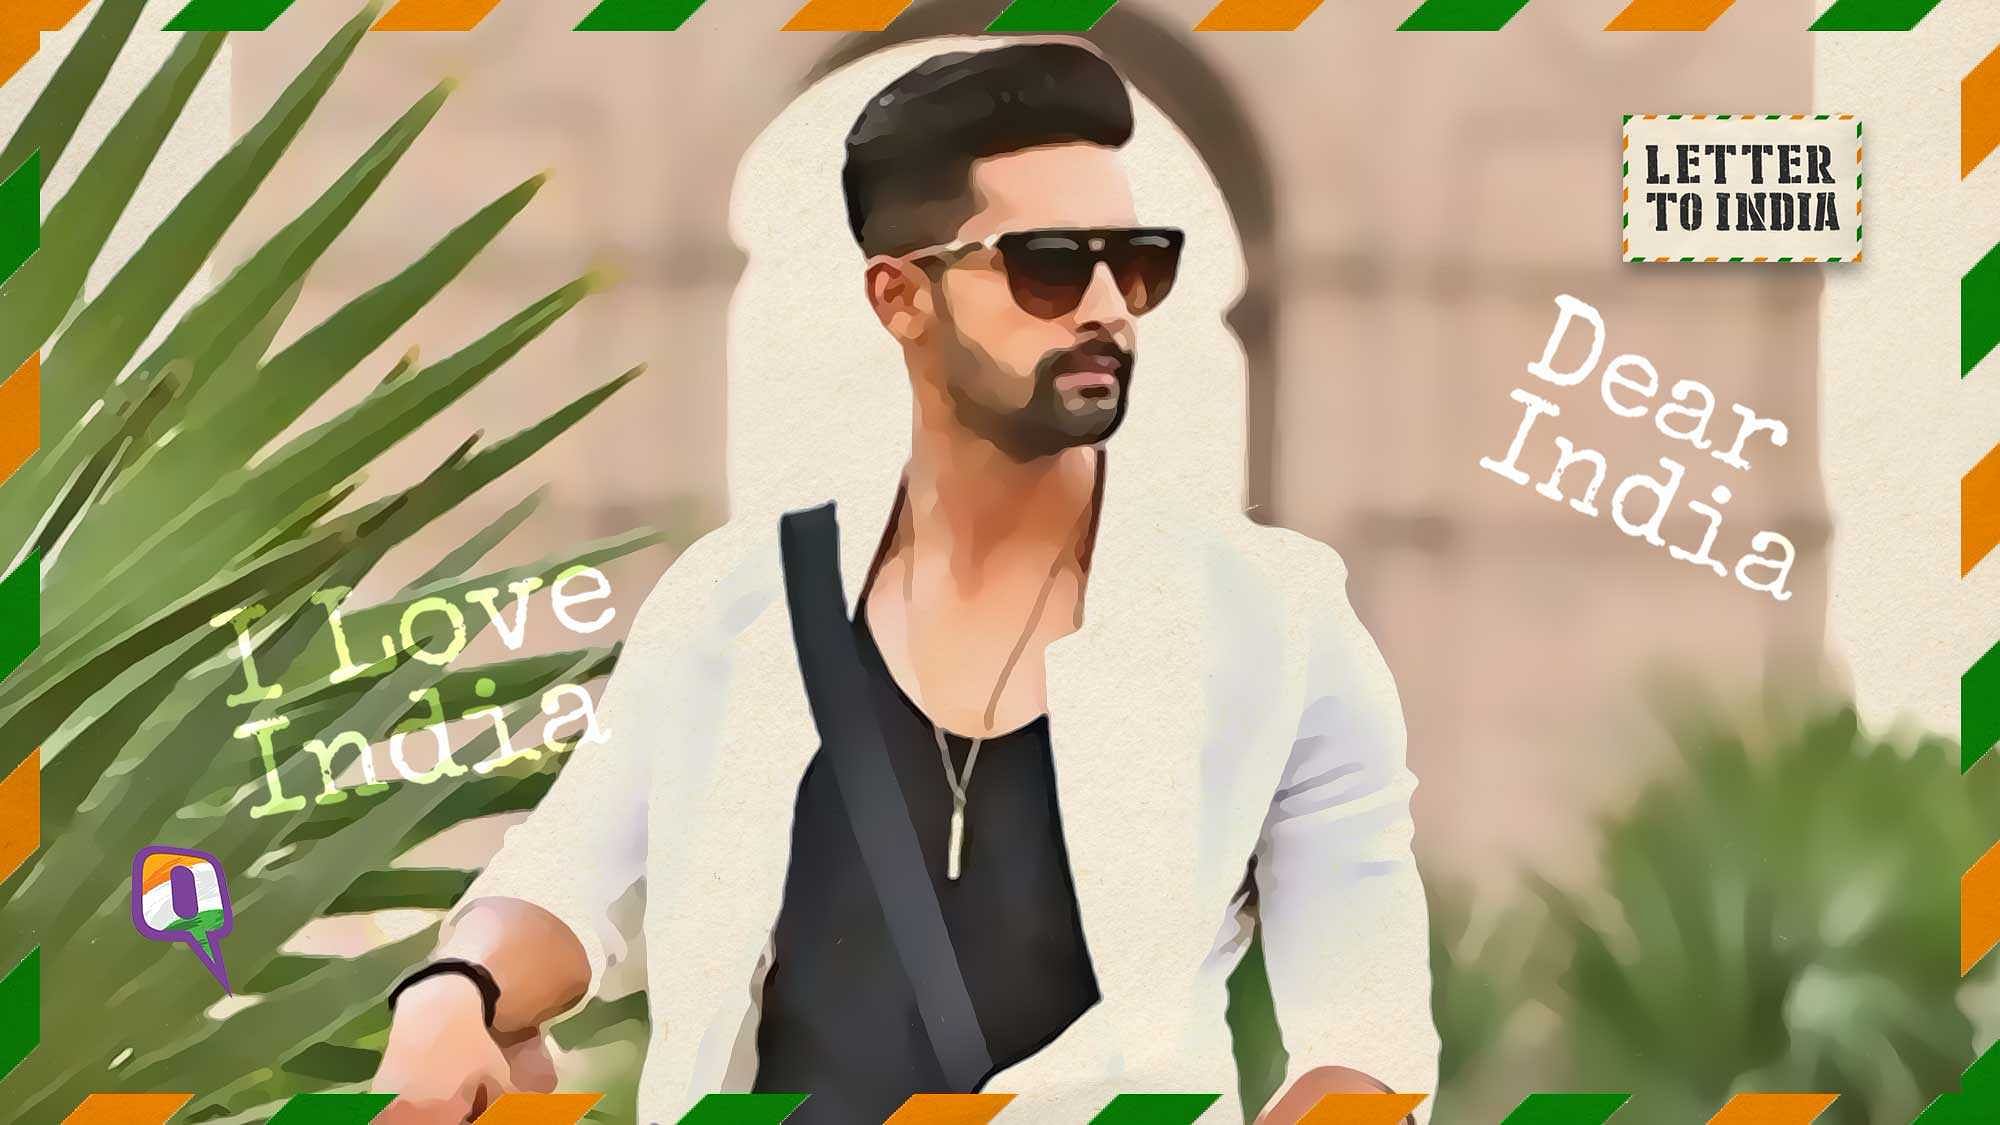 Ravi Dubey has sent his Letter To India.